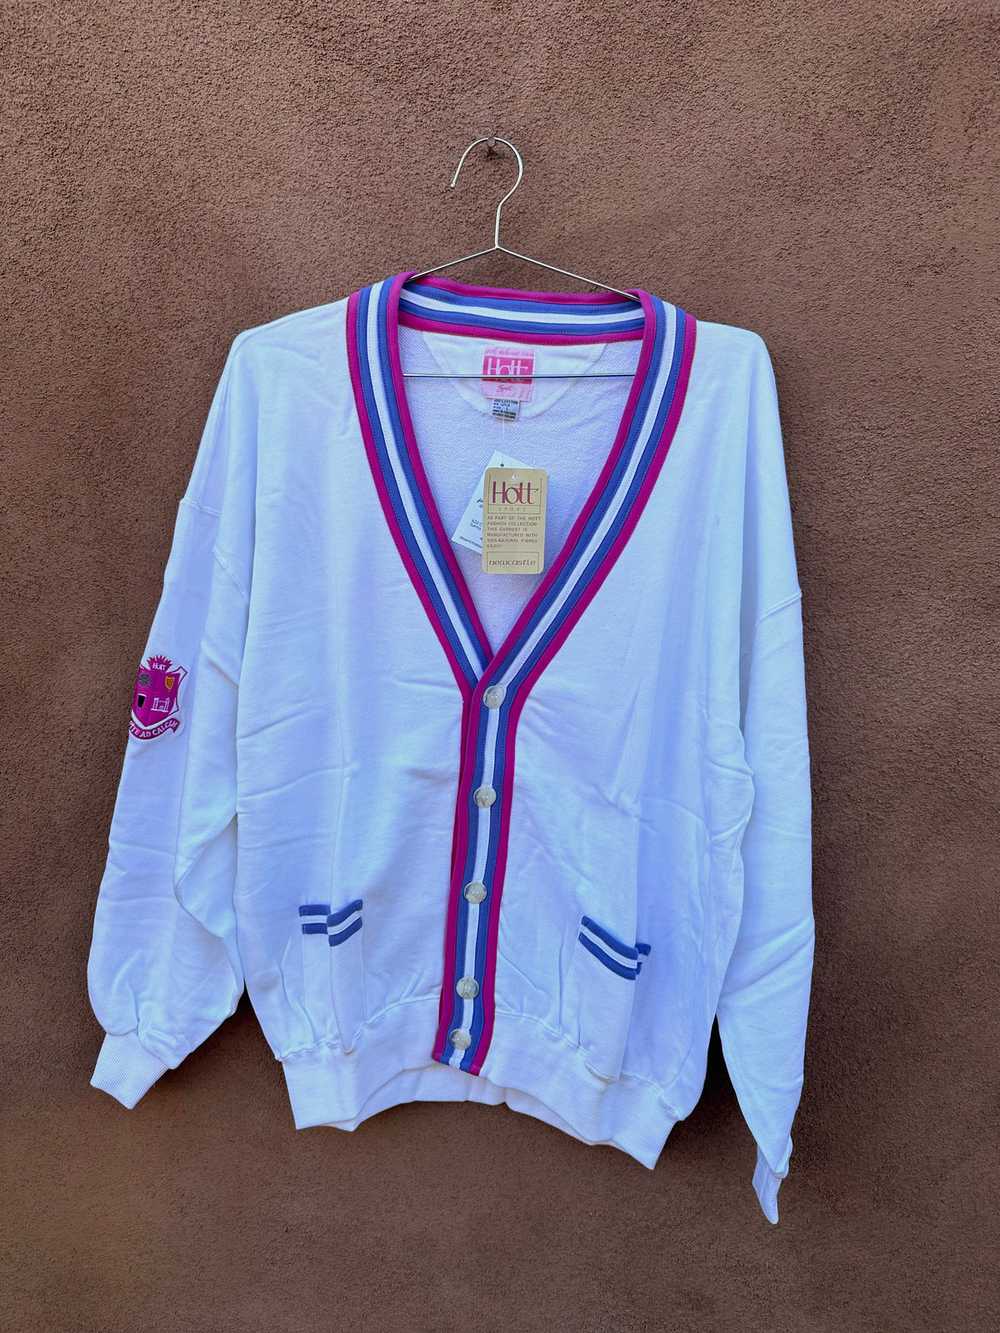 White Cotton Cardigan by Holt - Deadstock - image 1